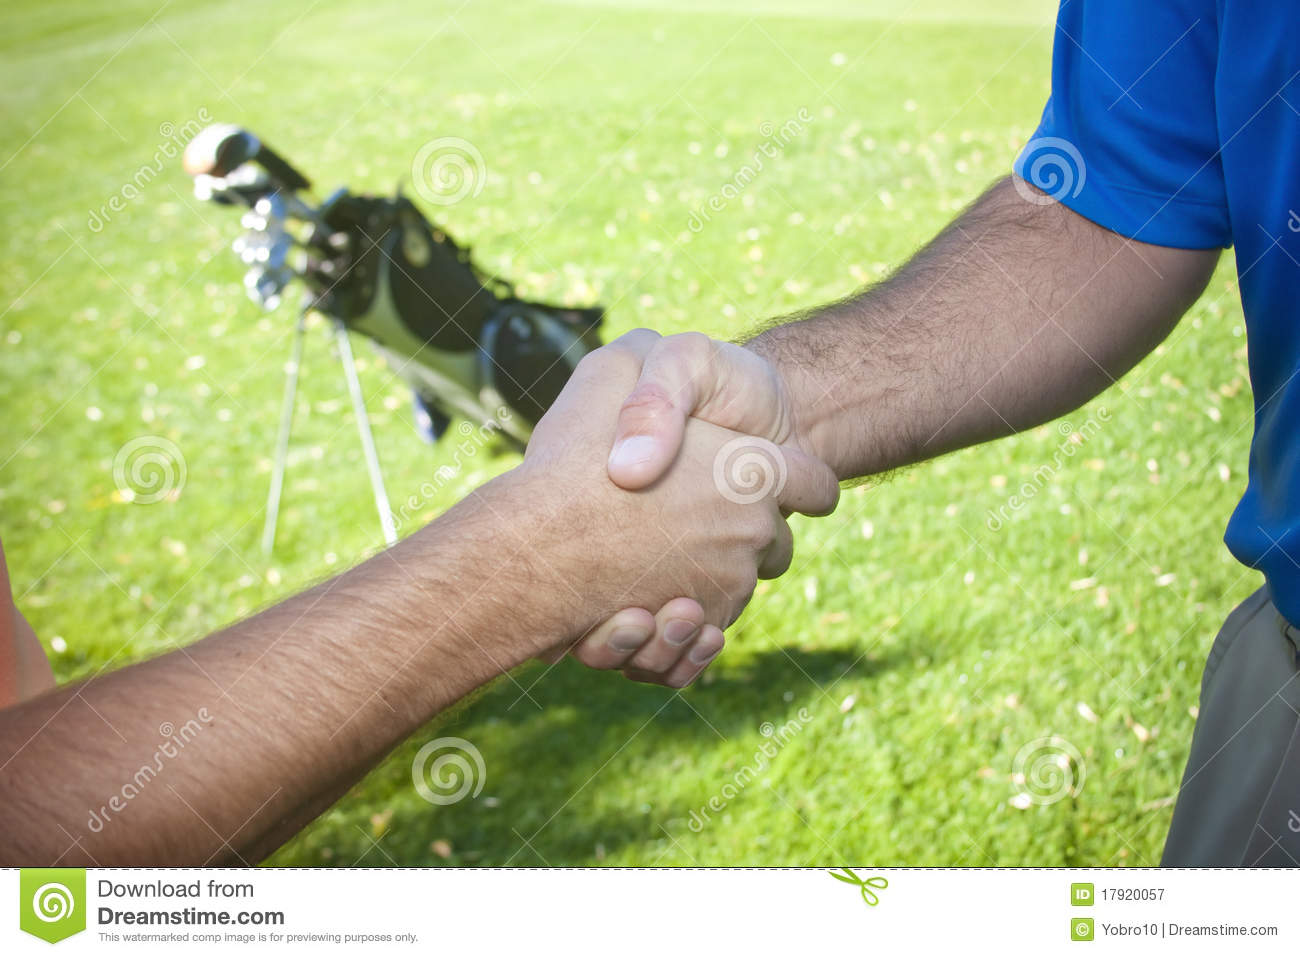 Golfers Shaking Hands Royalty Free Stock Photography   Image  17920057